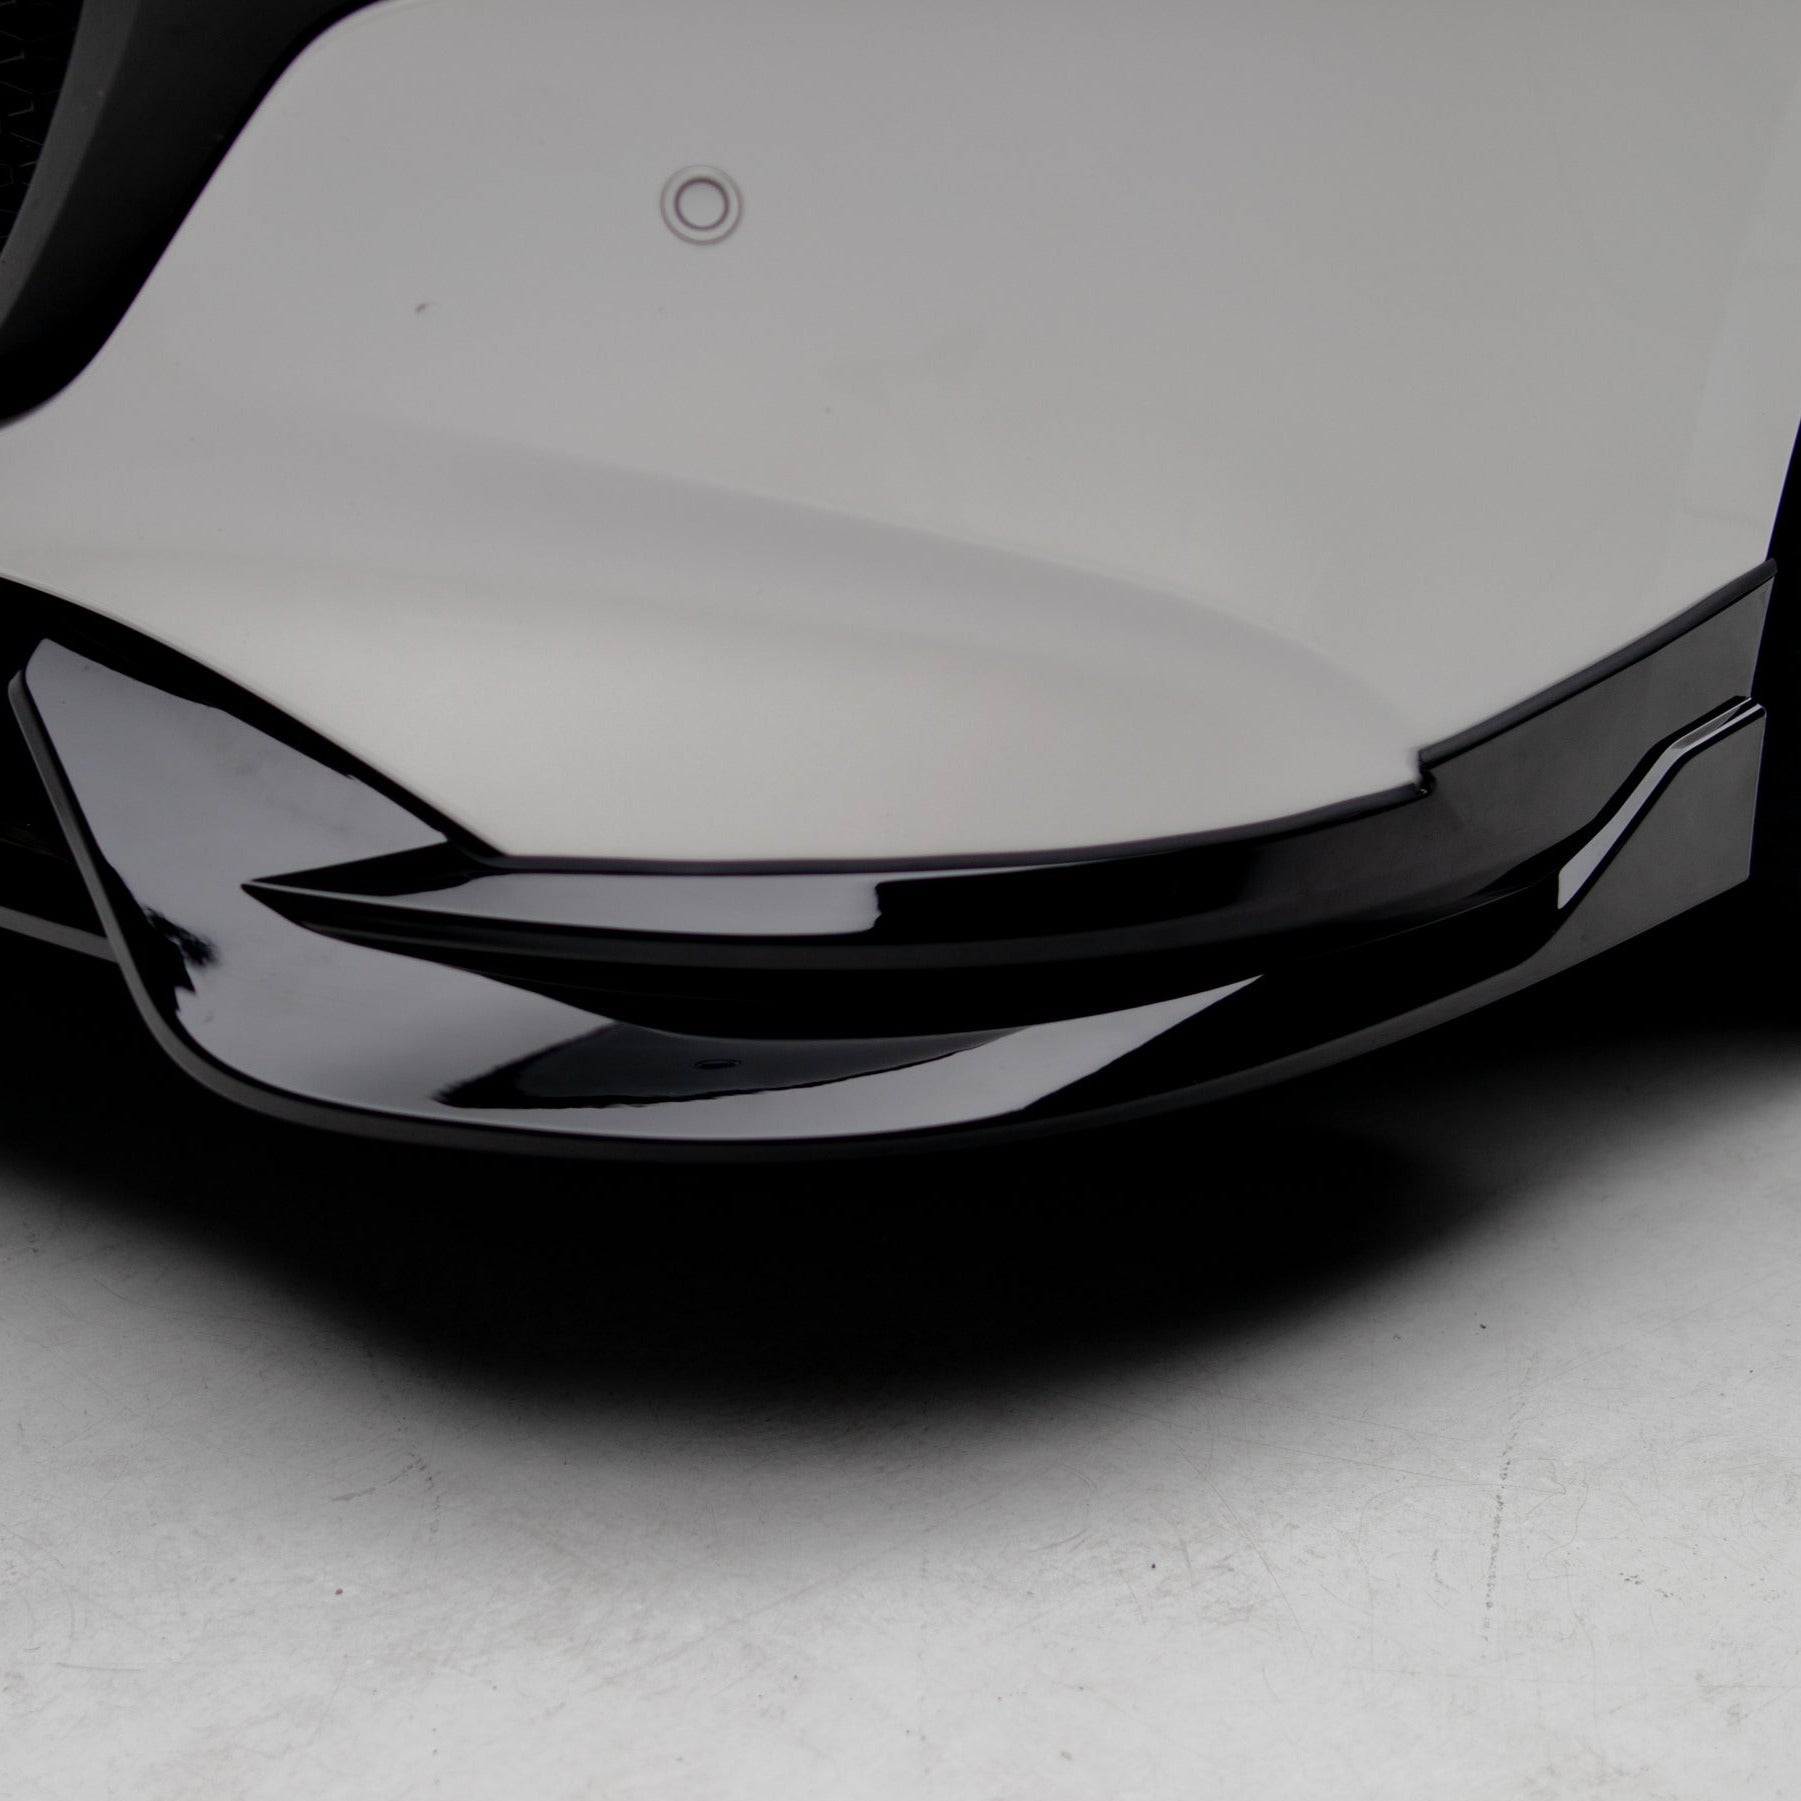 Zero Offset  T-Style Front Lip for 19+ Mazda 3 BP (Hatch) - MODE Auto Concepts